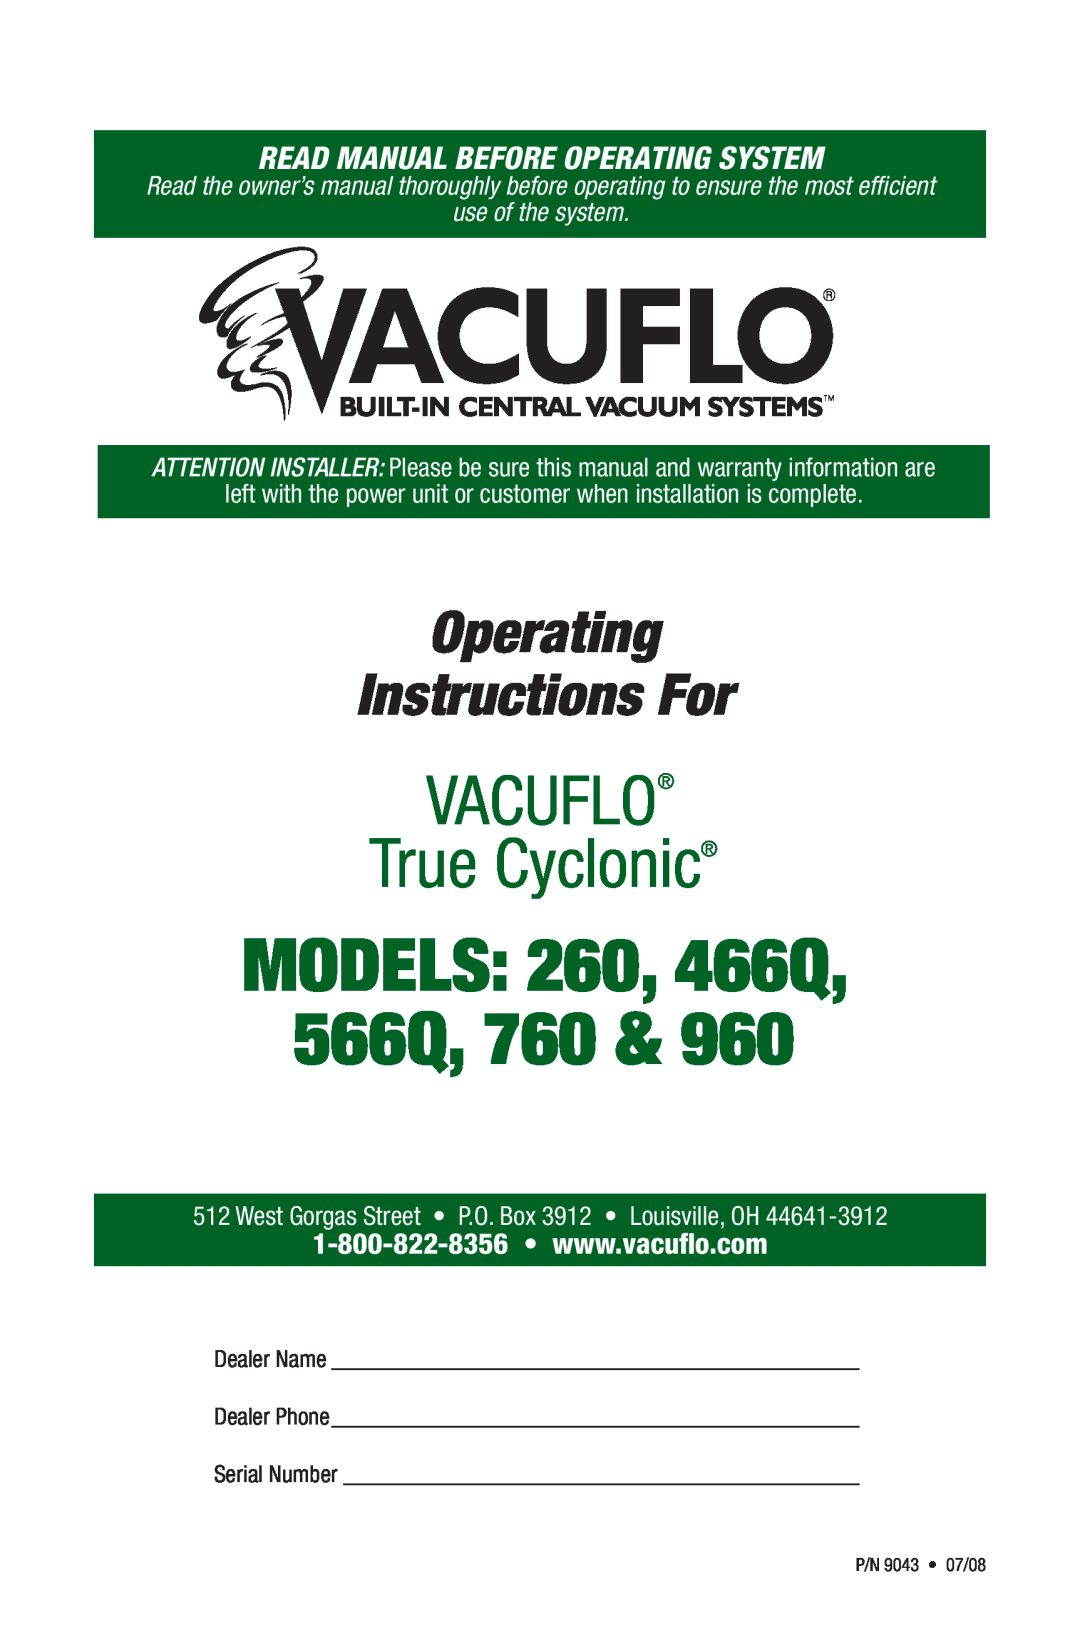 Vacuflo 760 owner manual MODELS 260, 466Q 566Q, VACUFLO True Cyclonic, Operating Instructions For, use of the system 